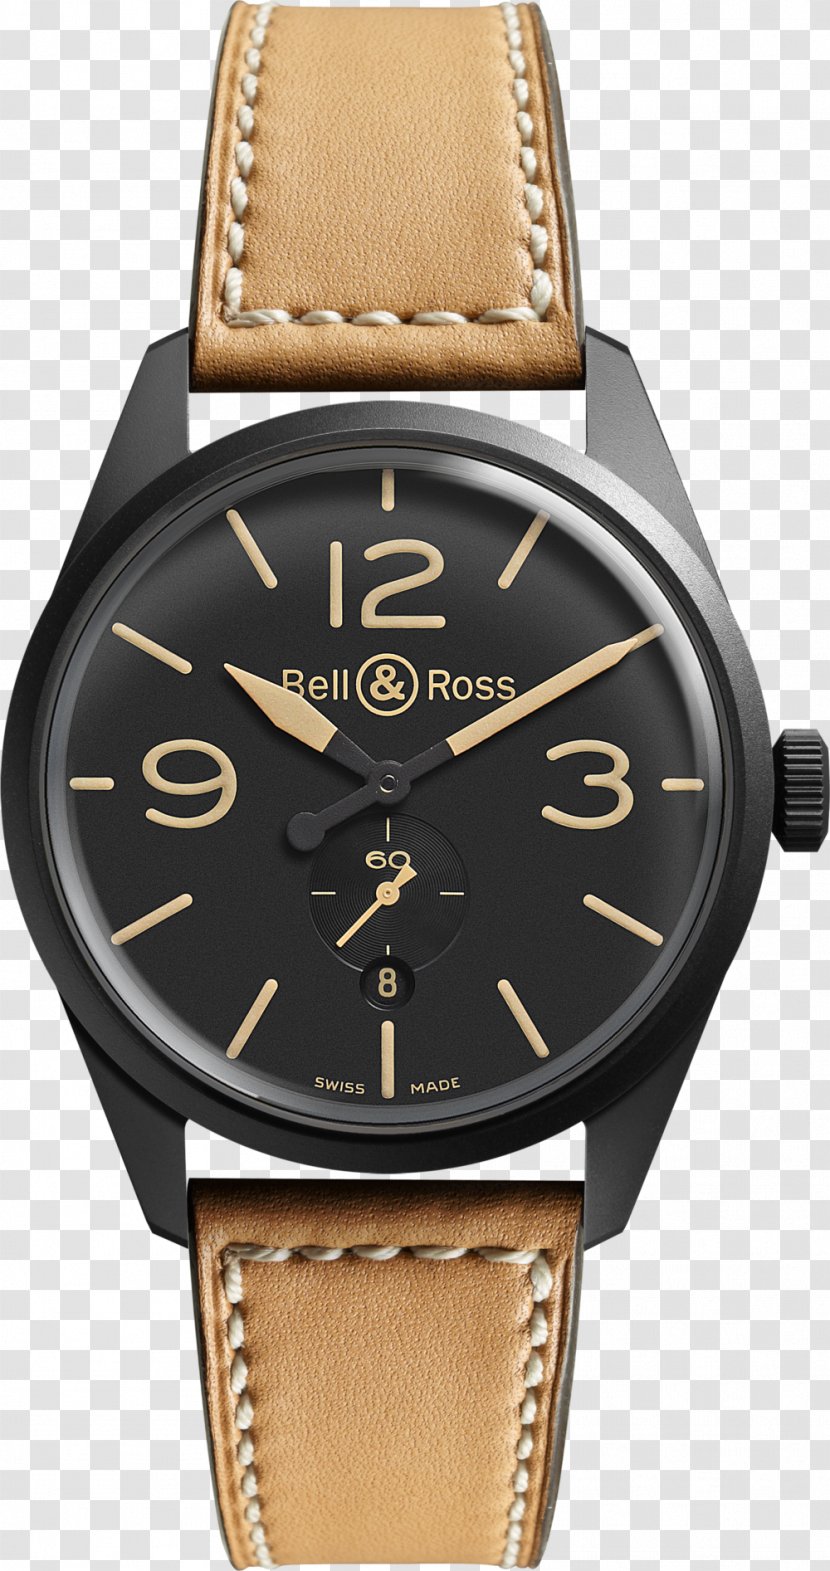 Bell & Ross, Inc. Automatic Watch Strap Transparent PNG